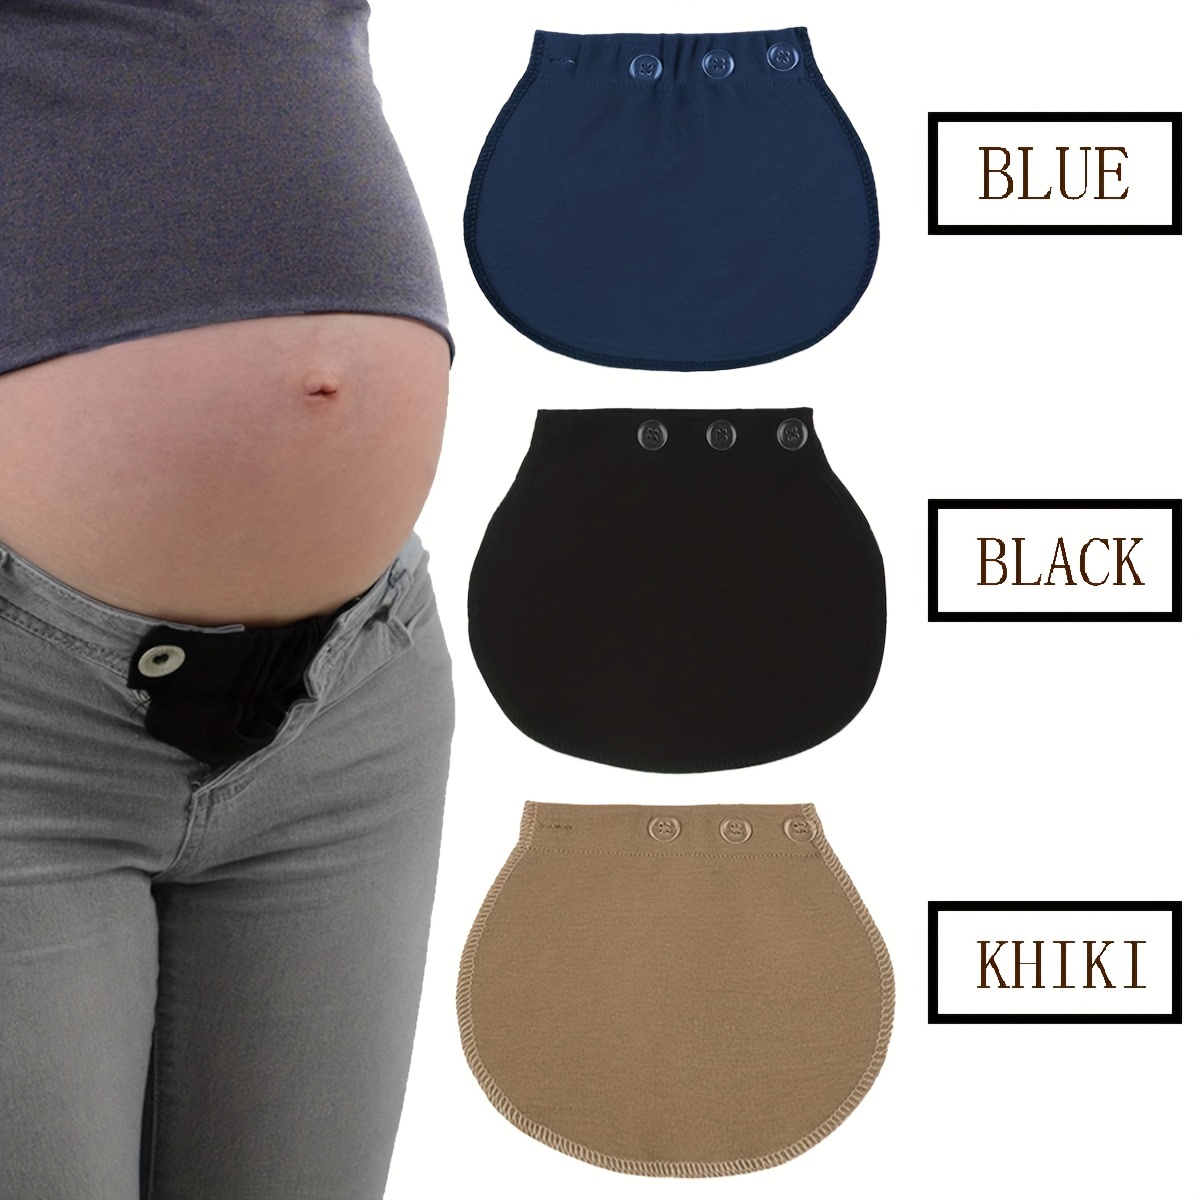 Pants Extenders for Pregnancy - What are they and how do they work?